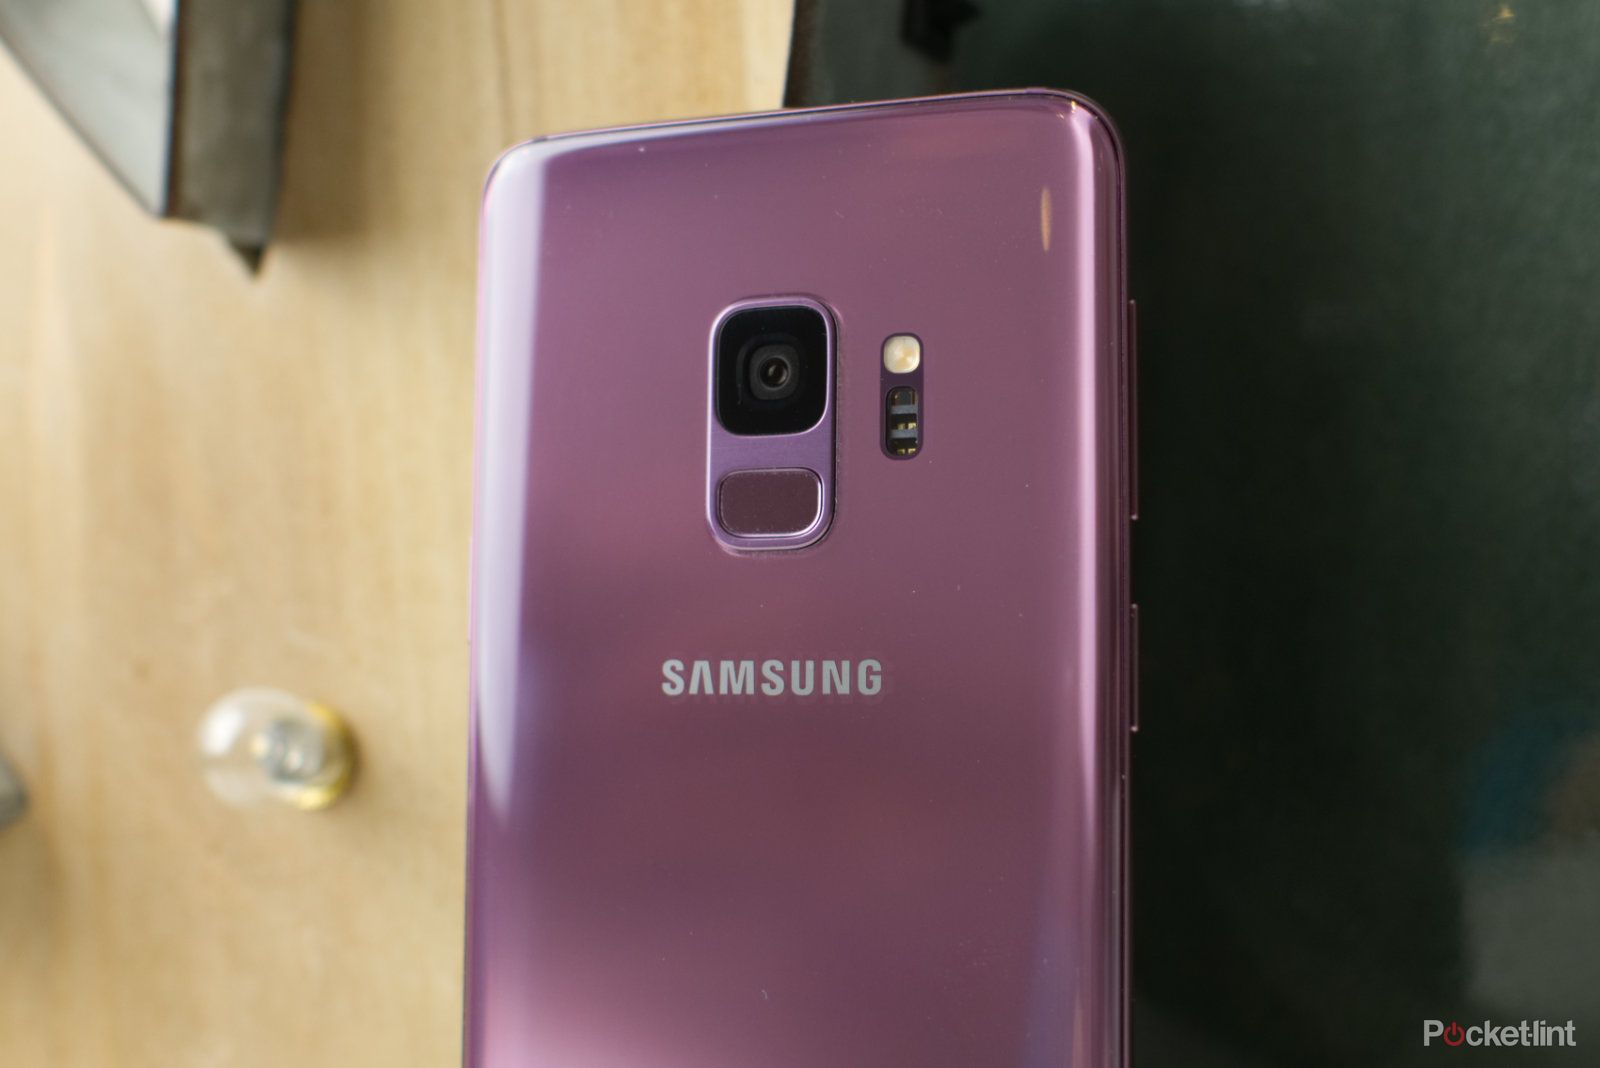 Samsung Galaxy S10 codenamed Beyond and more evidence points to in-display fingerprint sensor image 1